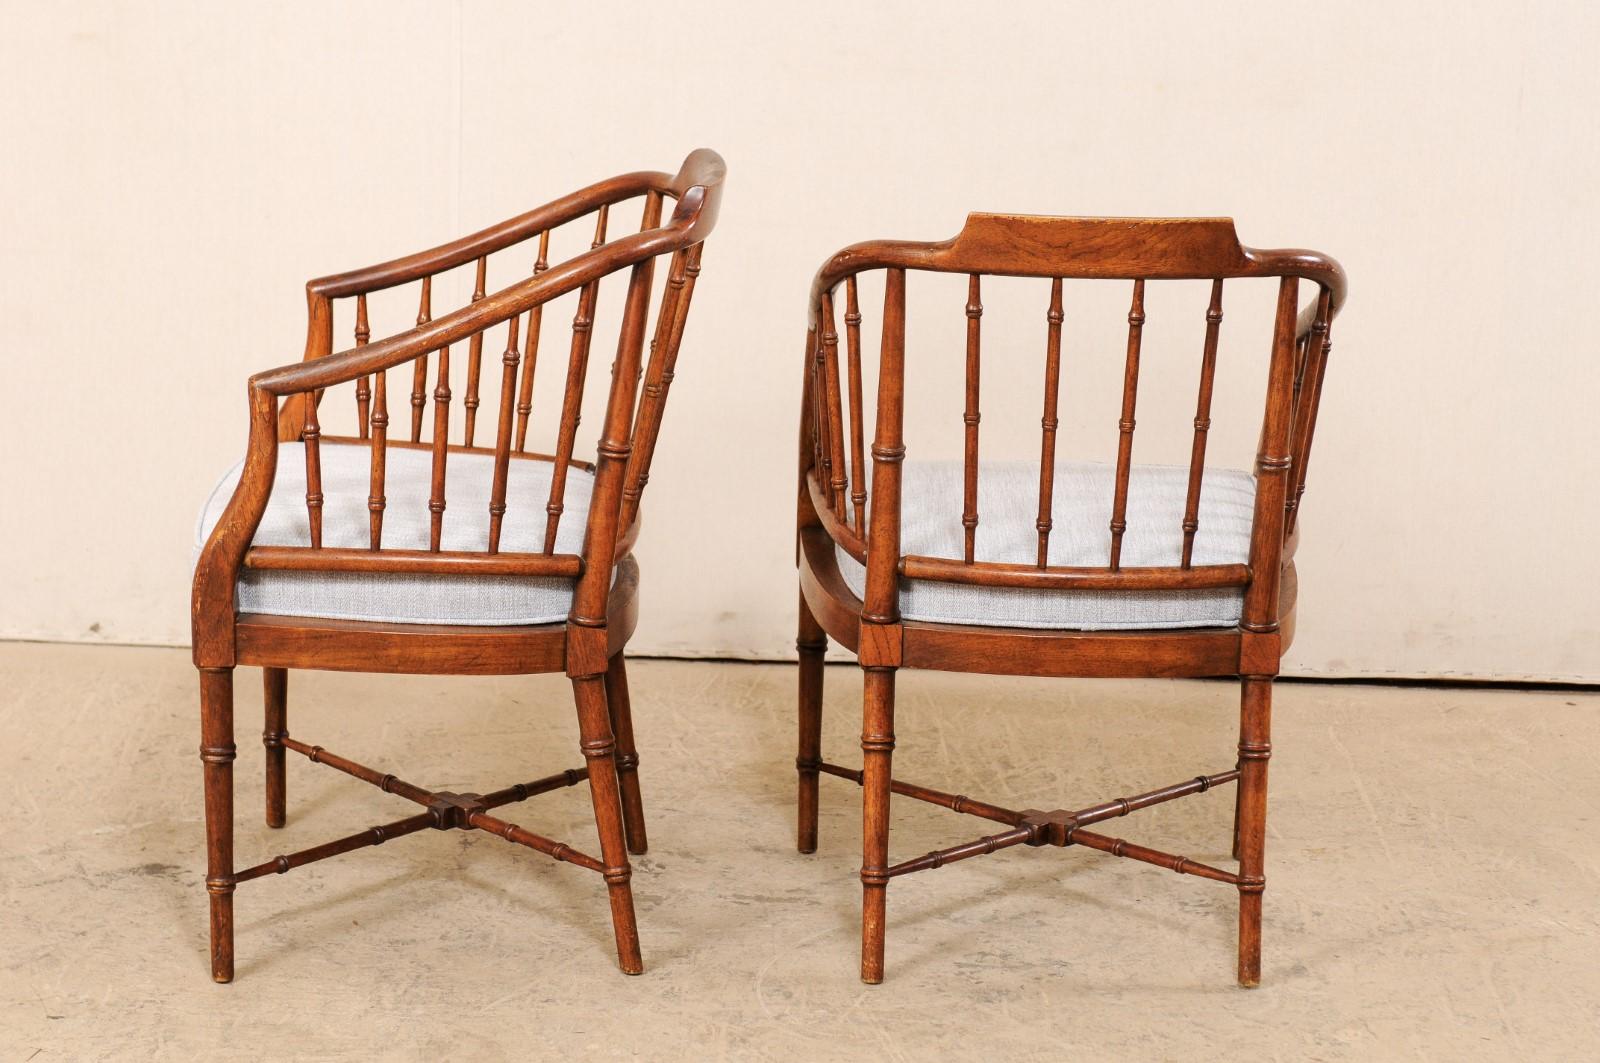 Upholstery Pair of Midcentury American Faux-Bamboo Chairs